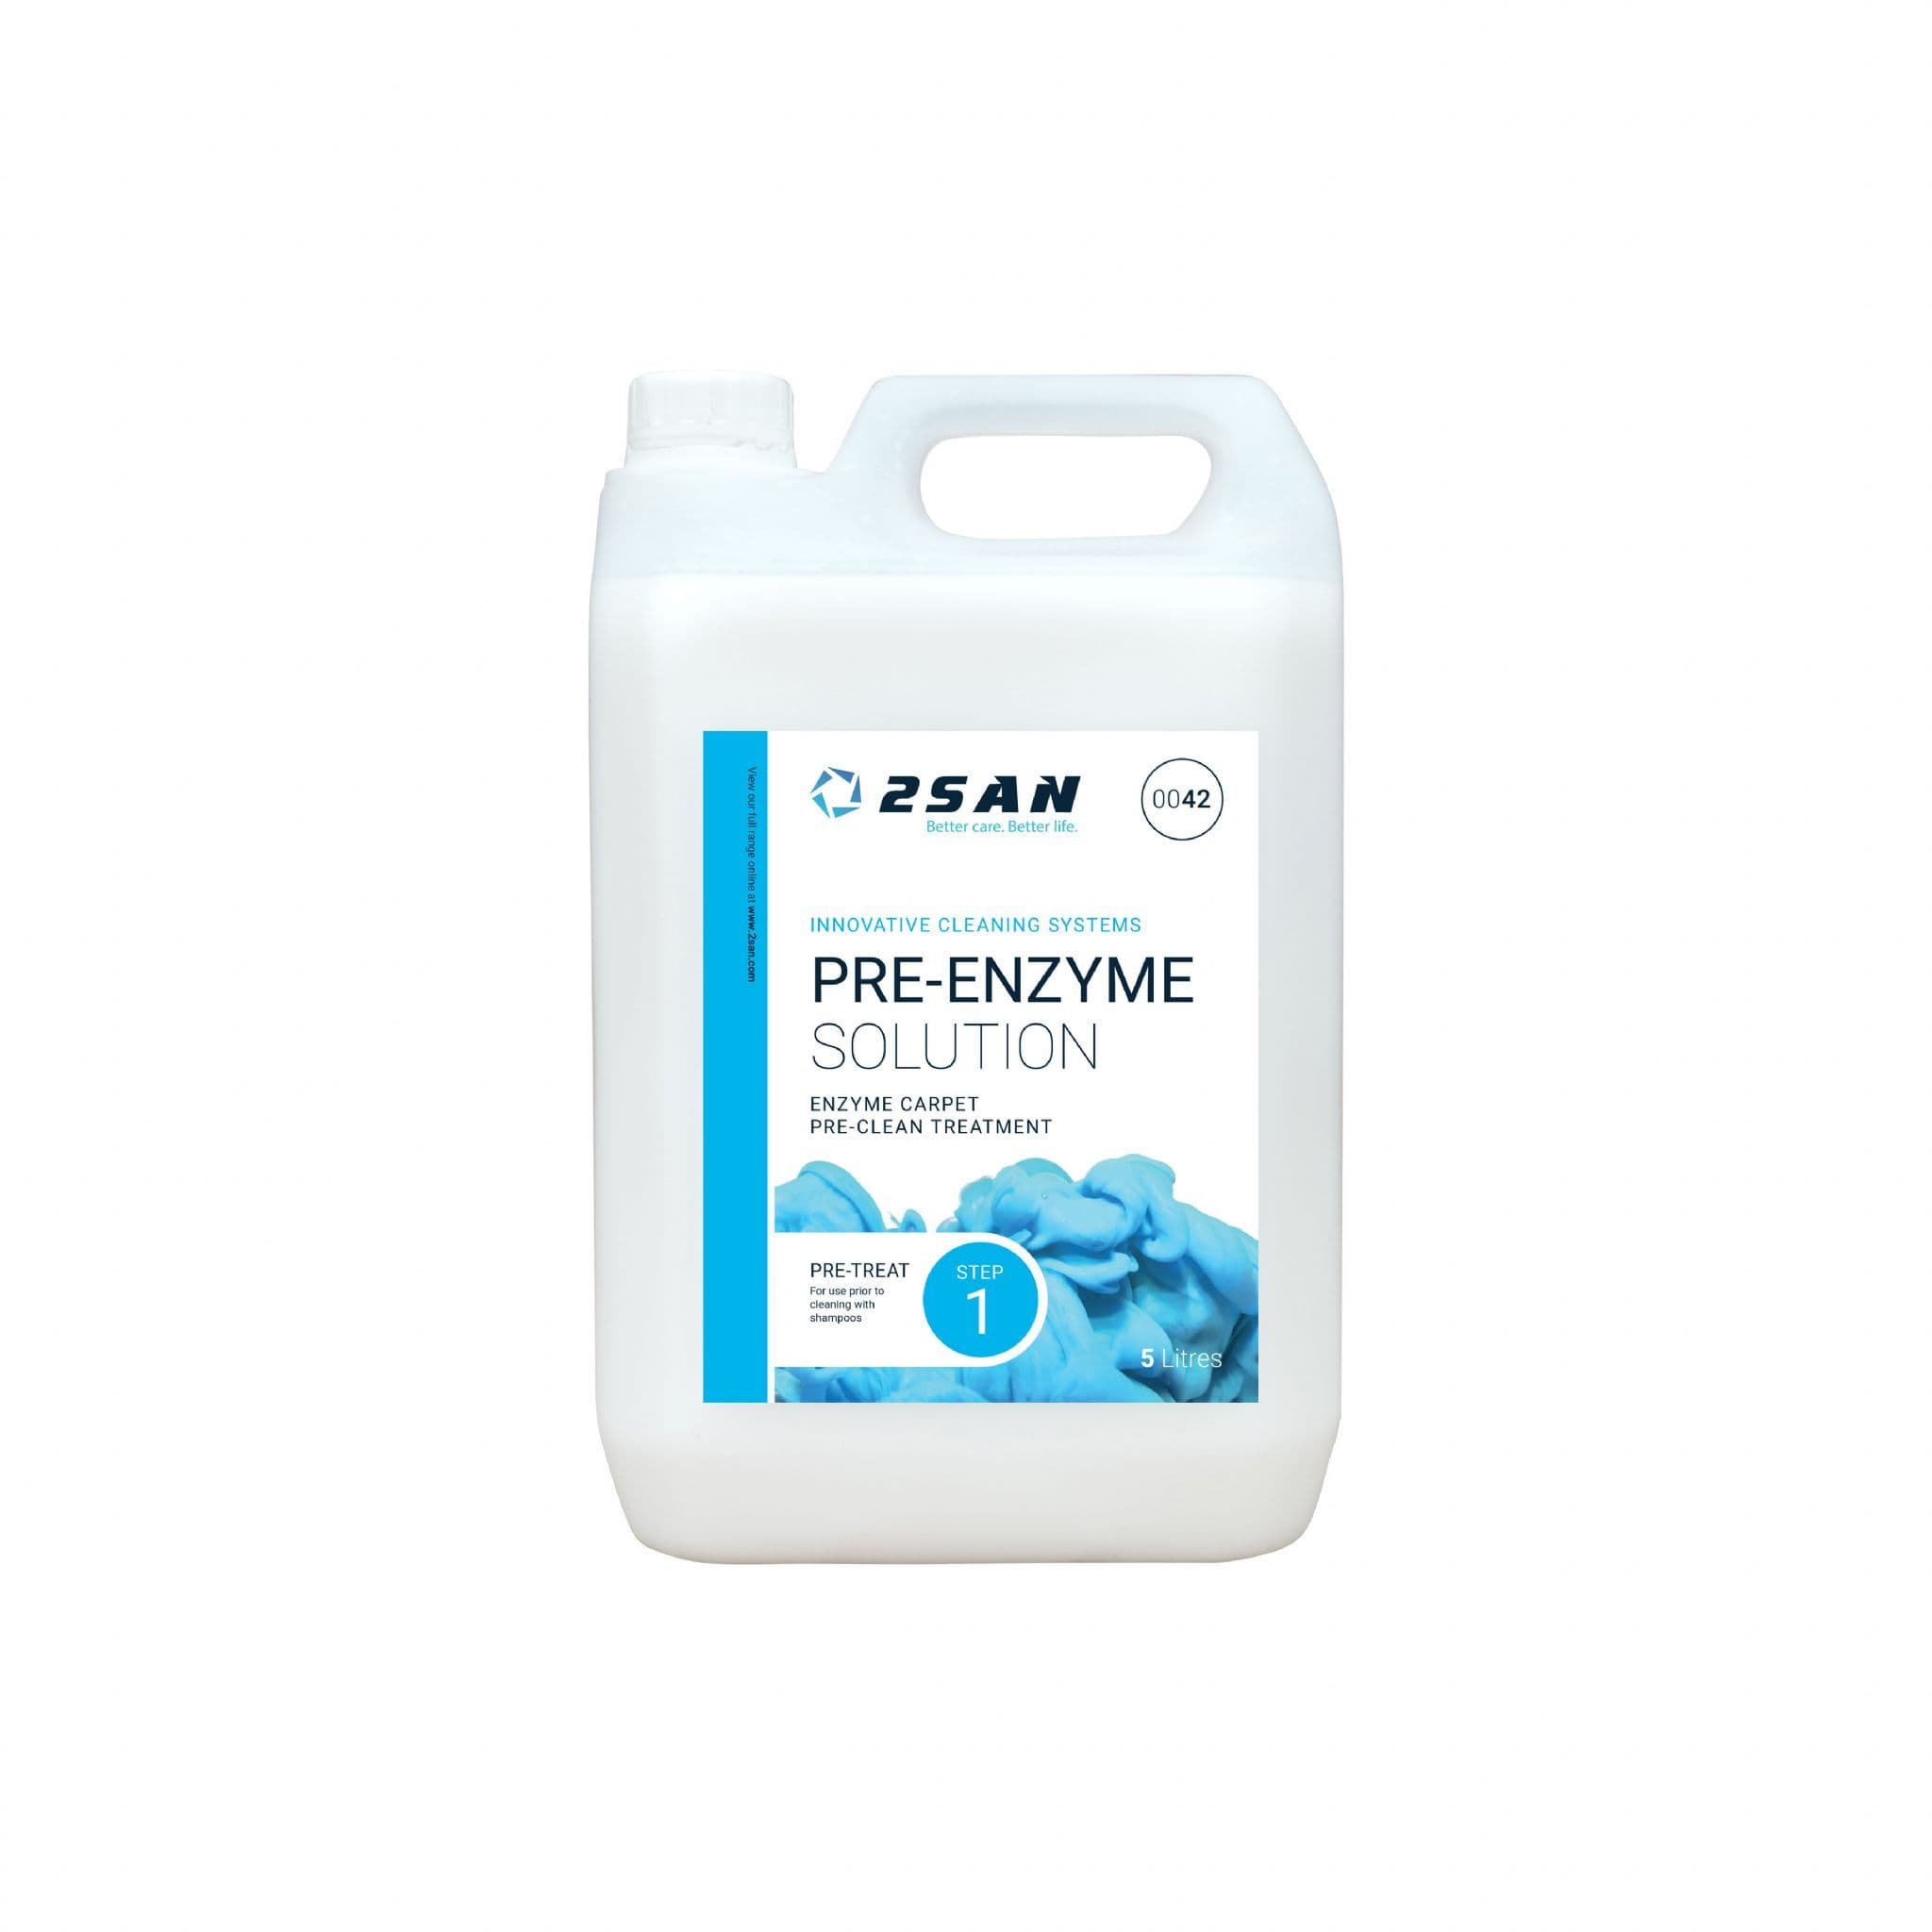 2SAN(Craftex) Pre-Enzyme Solution 5L 0042